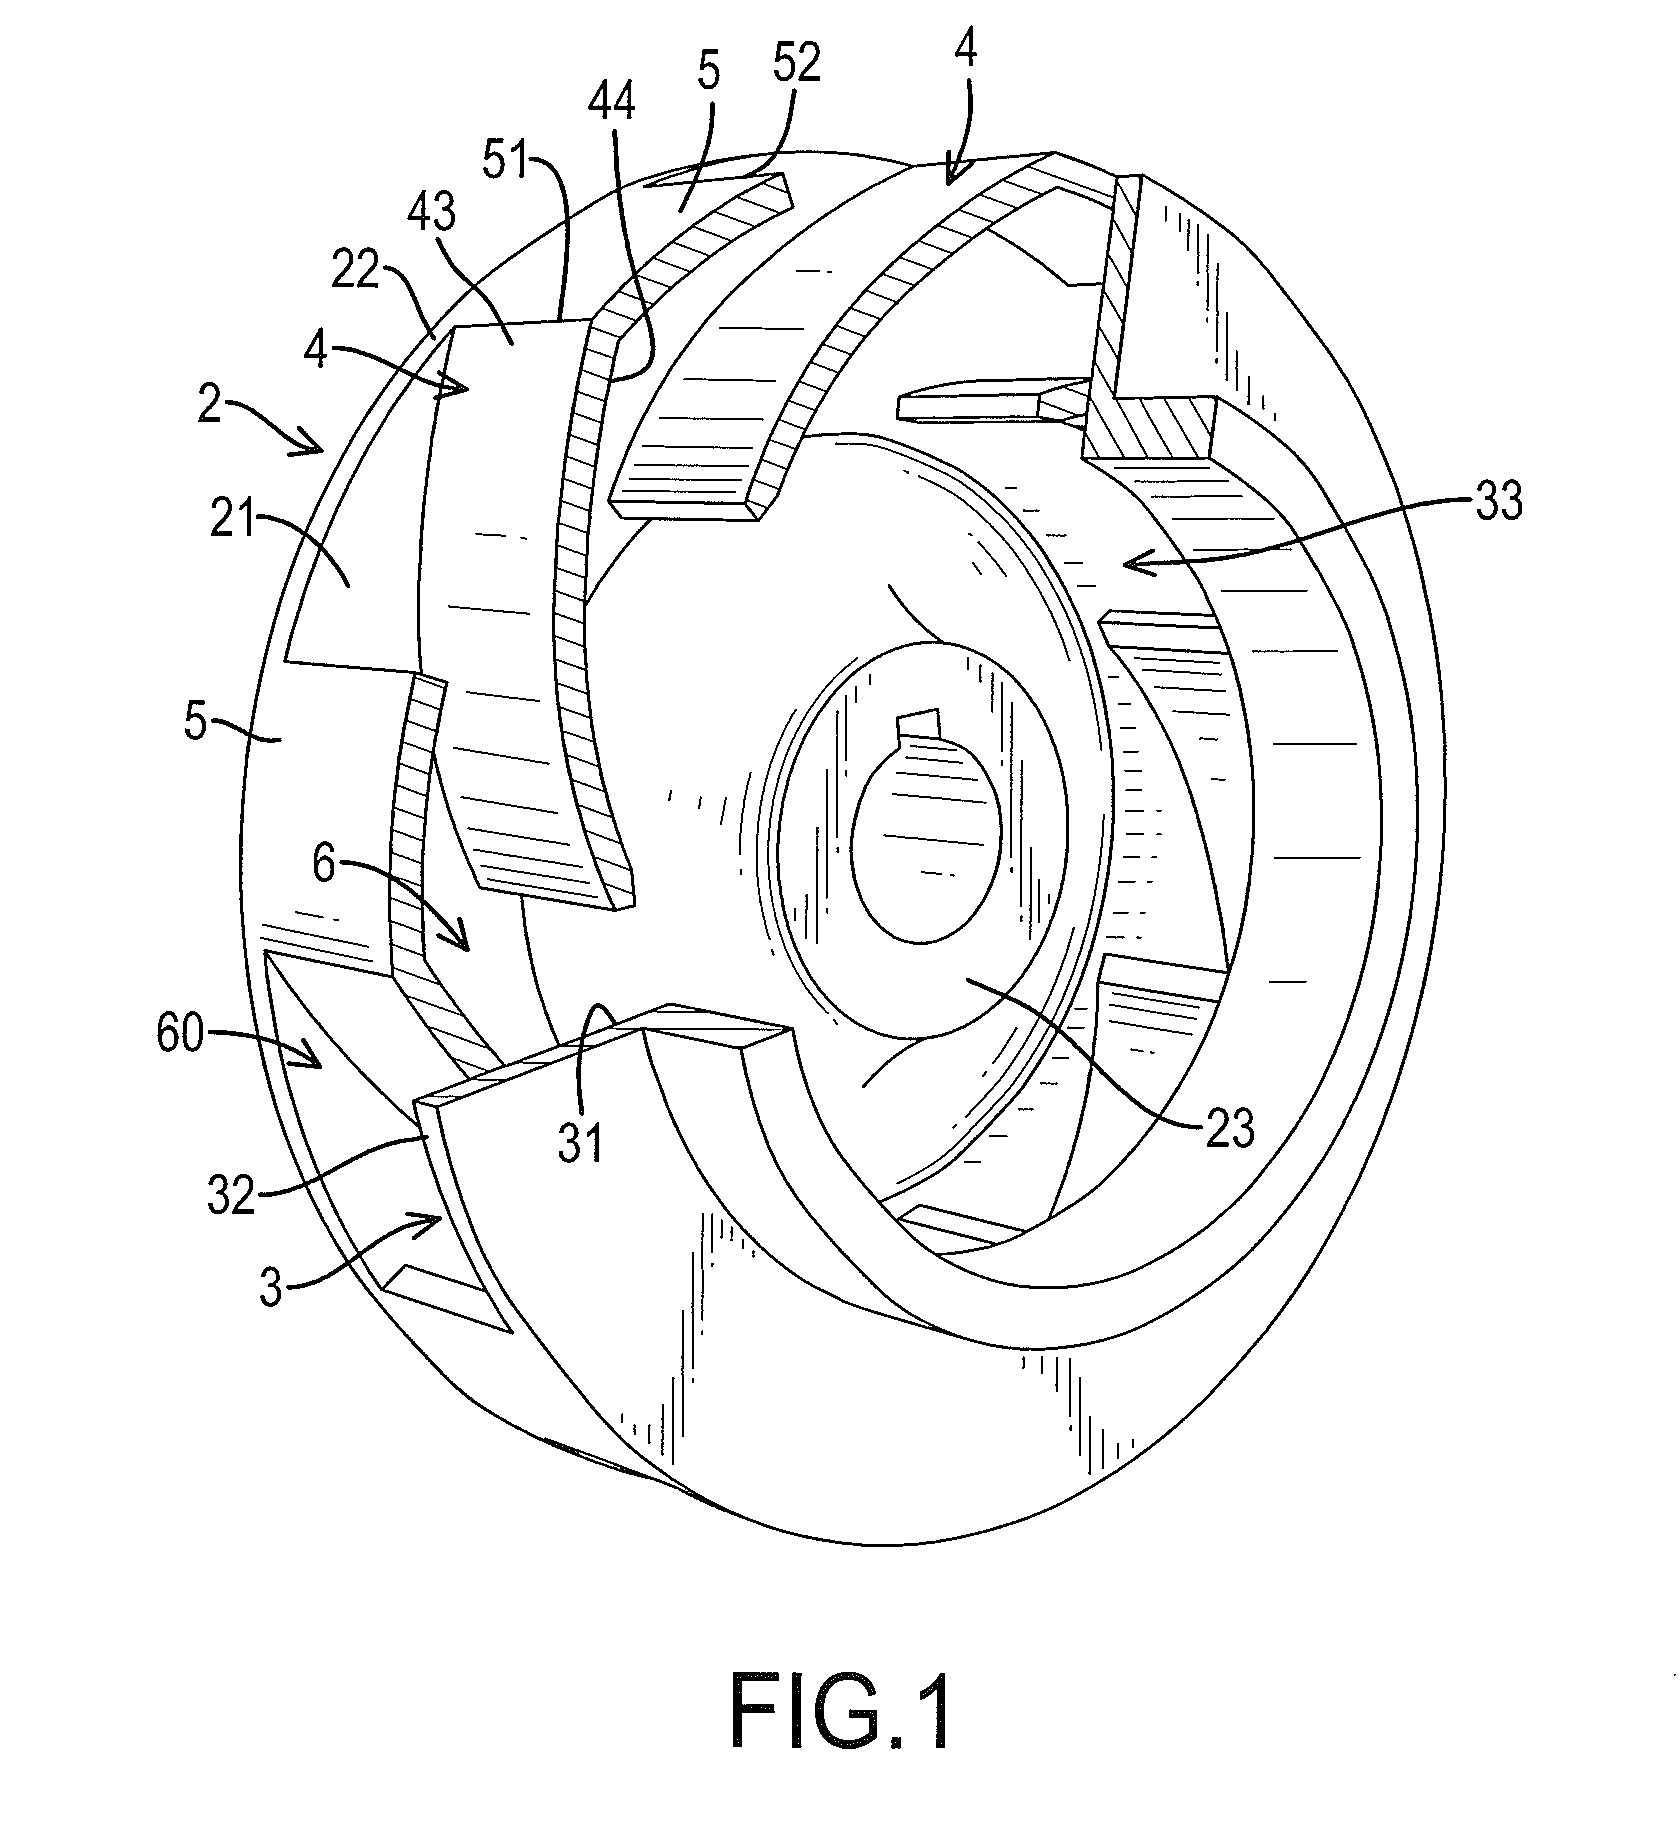 Low-Turbulence Impeller for a Fluid Pump